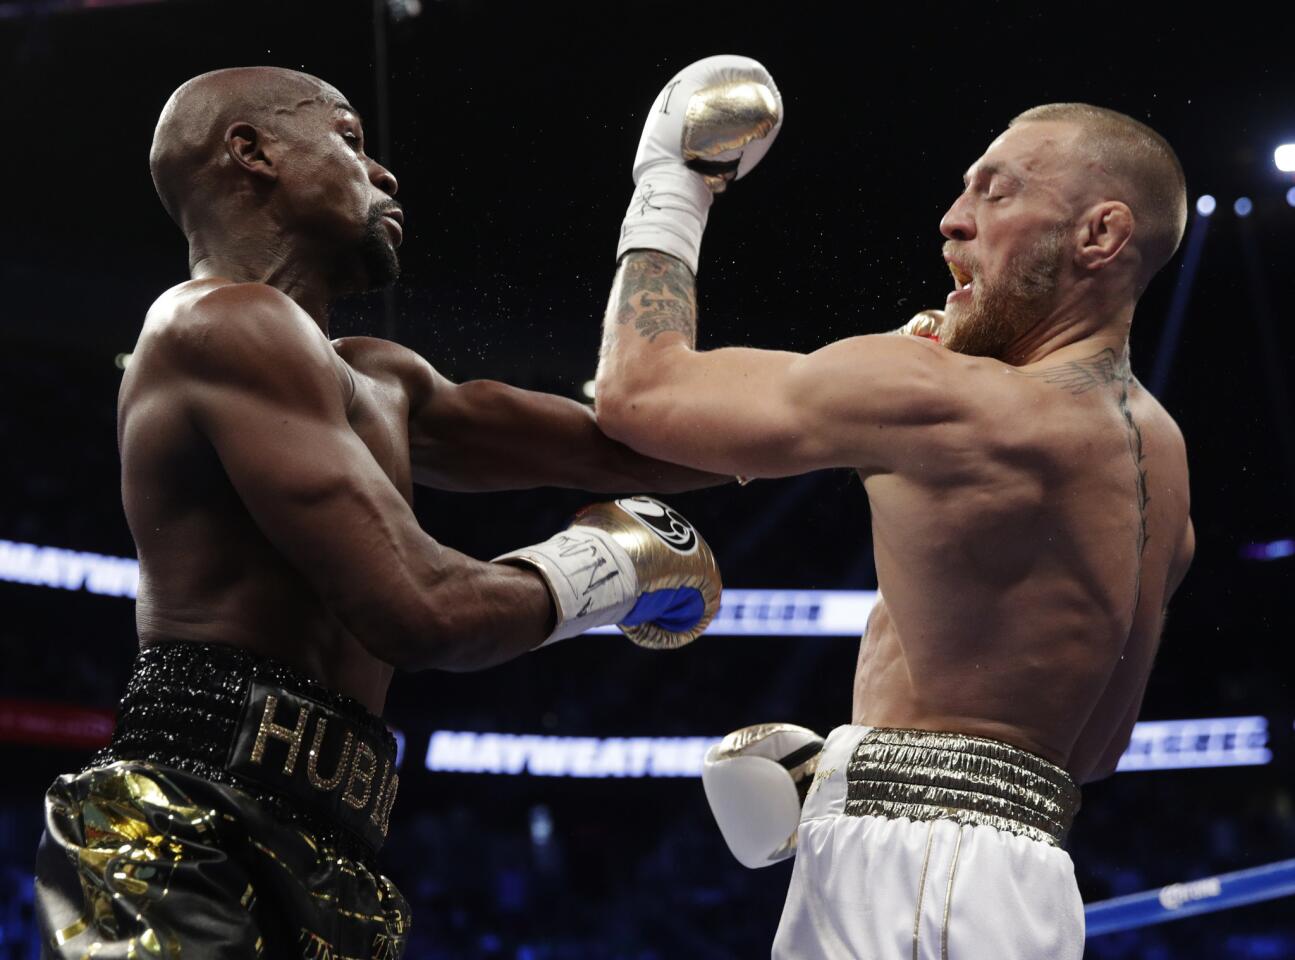 Floyd Mayweather Jr. connects with a left against Conor McGregor during their super-welterweight bout.